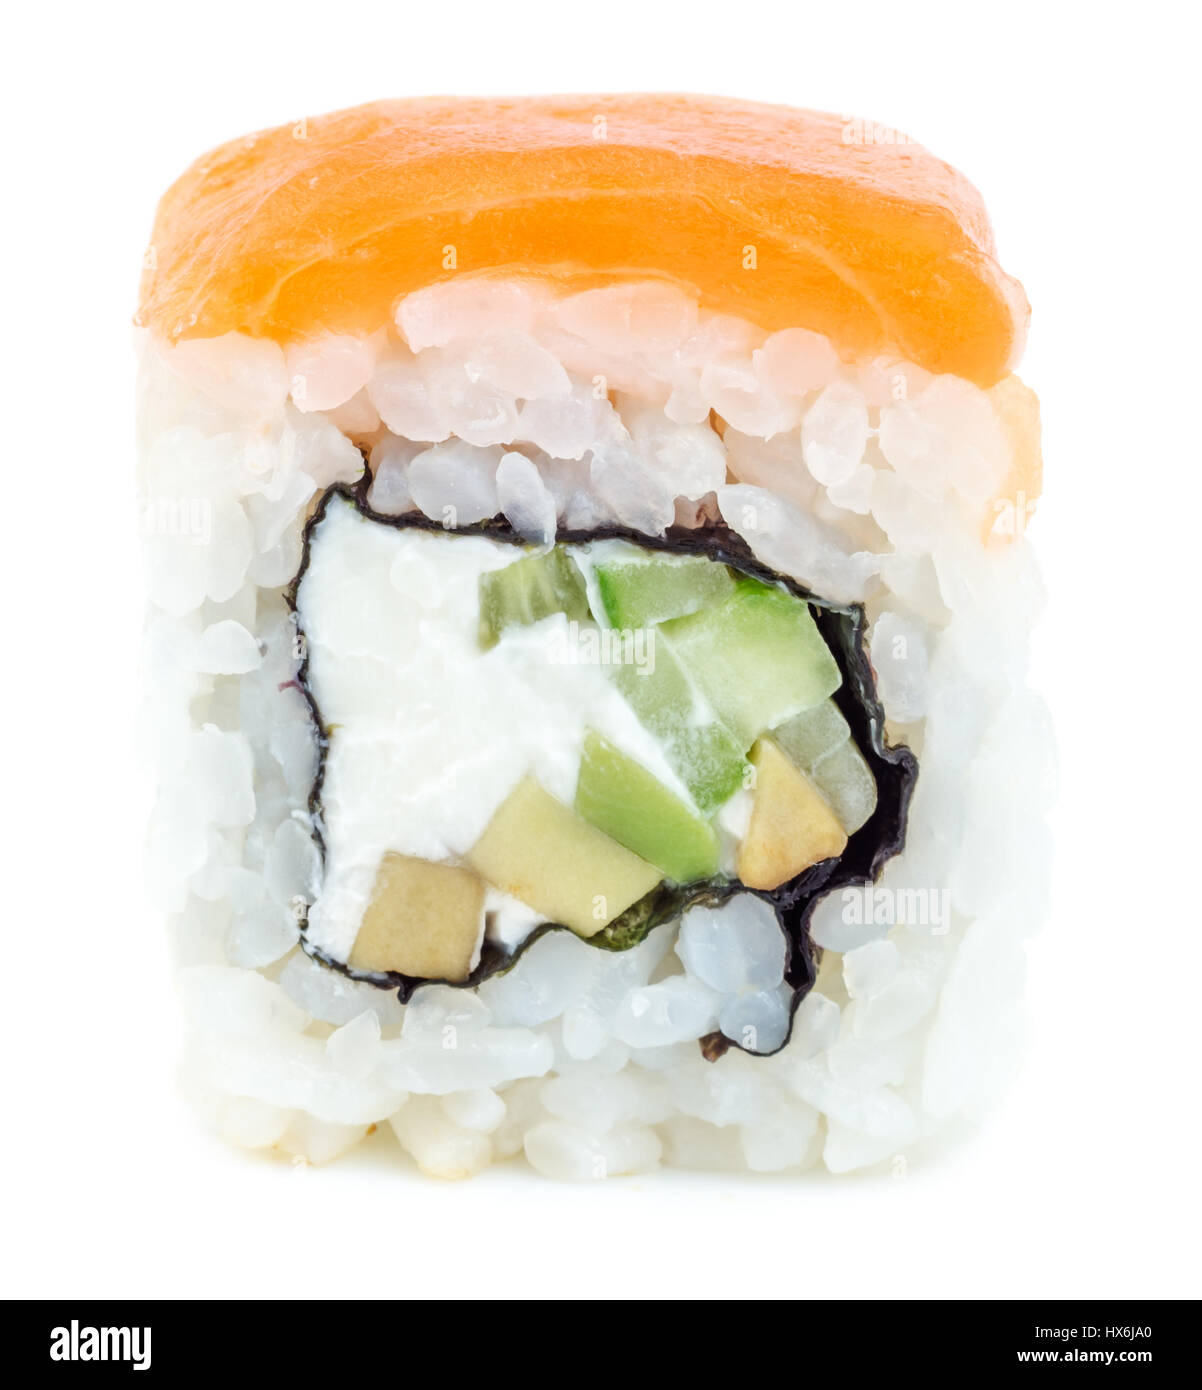 Asian Japanese food. Sushi roll with salmon, cheese, avocado and cucumber. Close up front view isolated on white background. Stock Photo